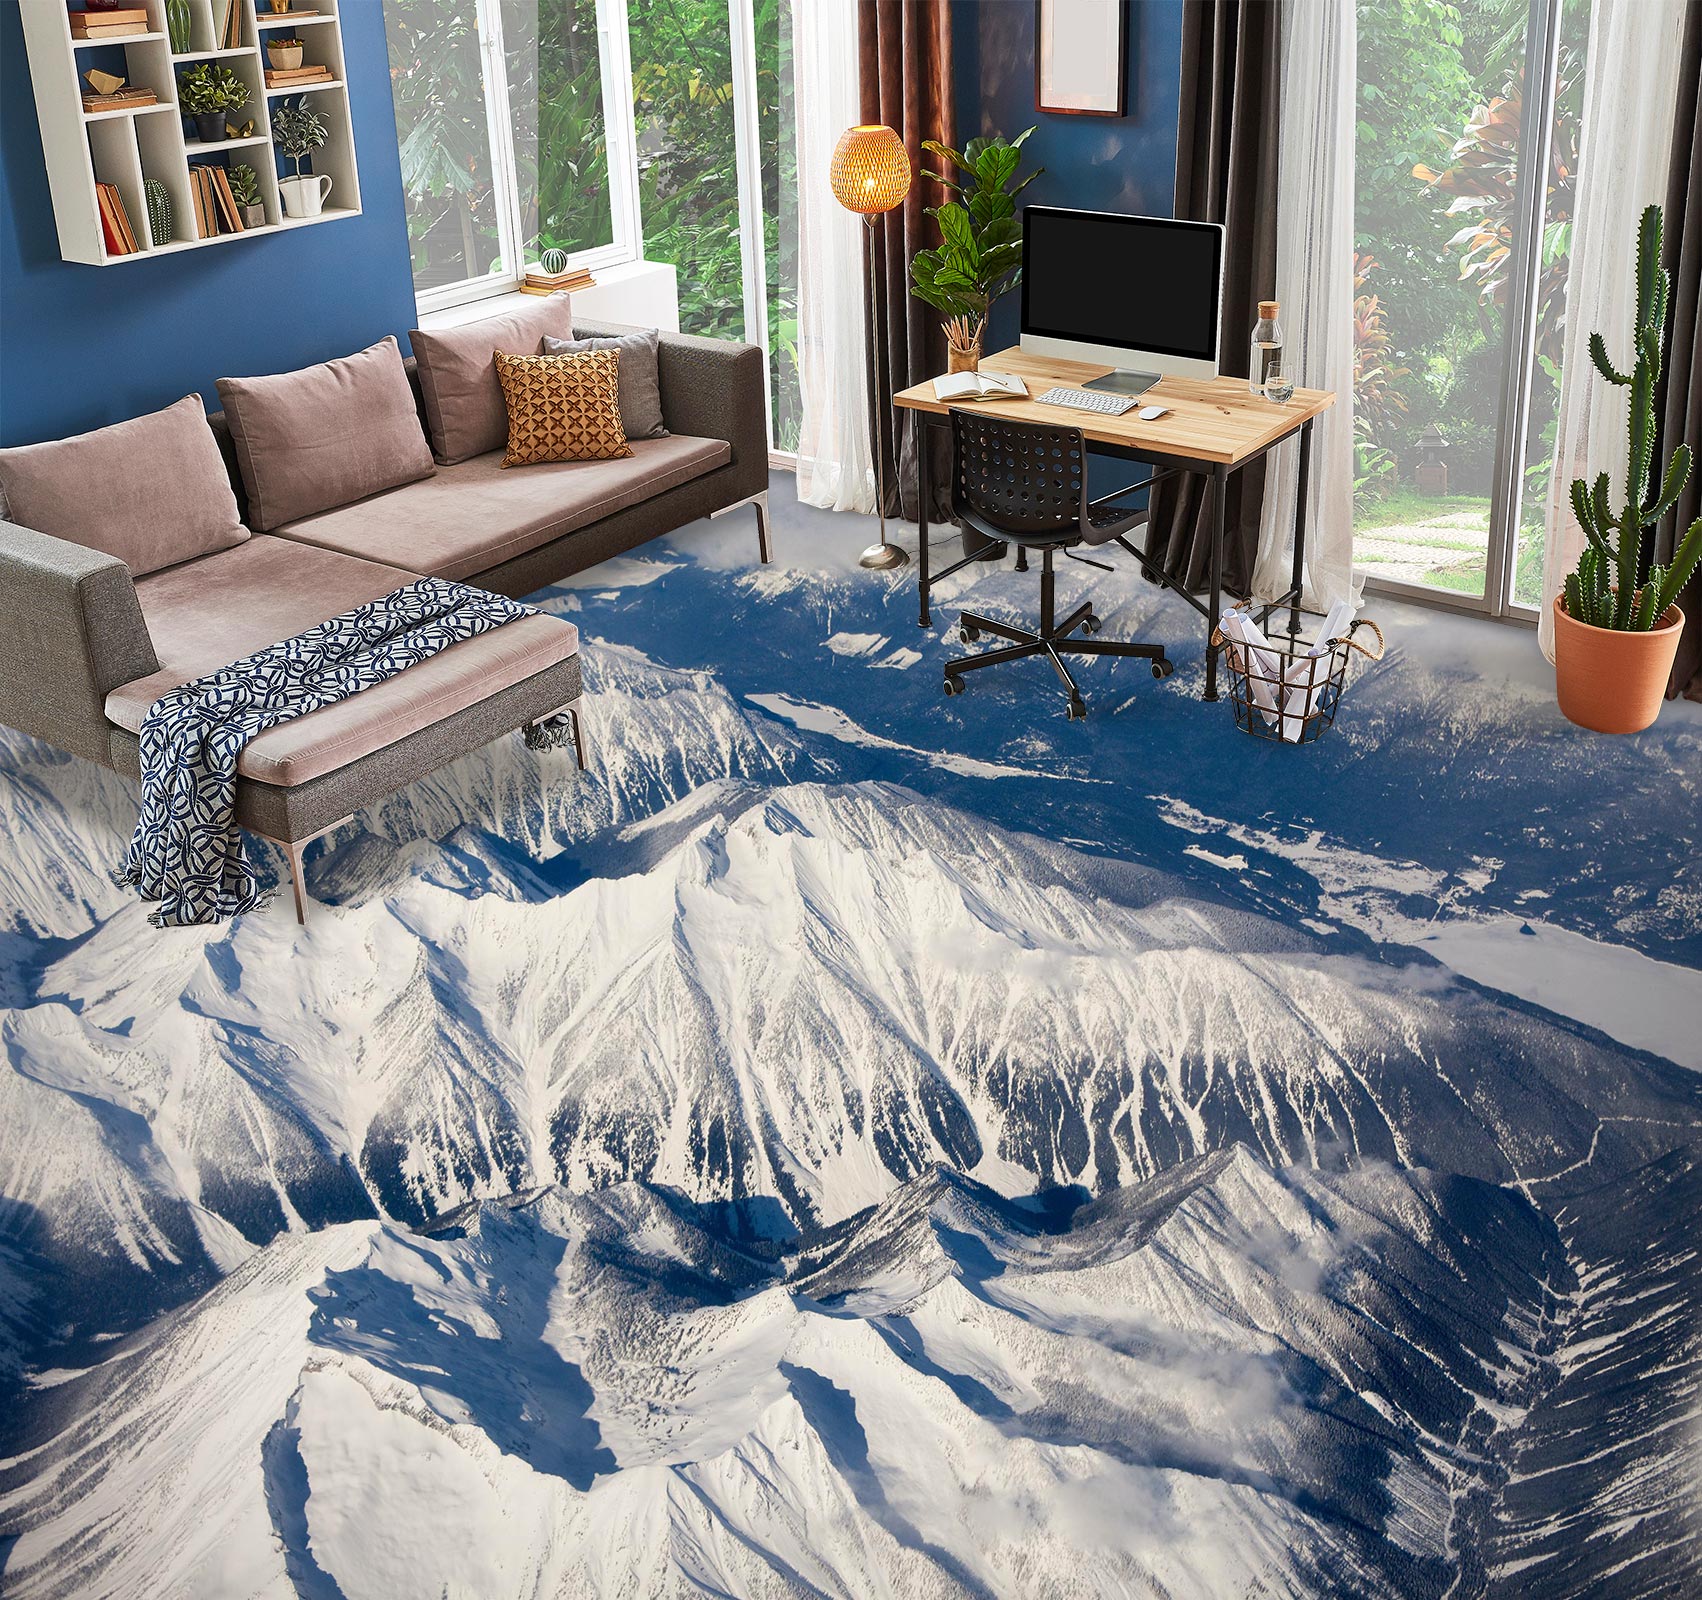 3D Snow Mountains 1039 Floor Mural  Wallpaper Murals Self-Adhesive Removable Print Epoxy